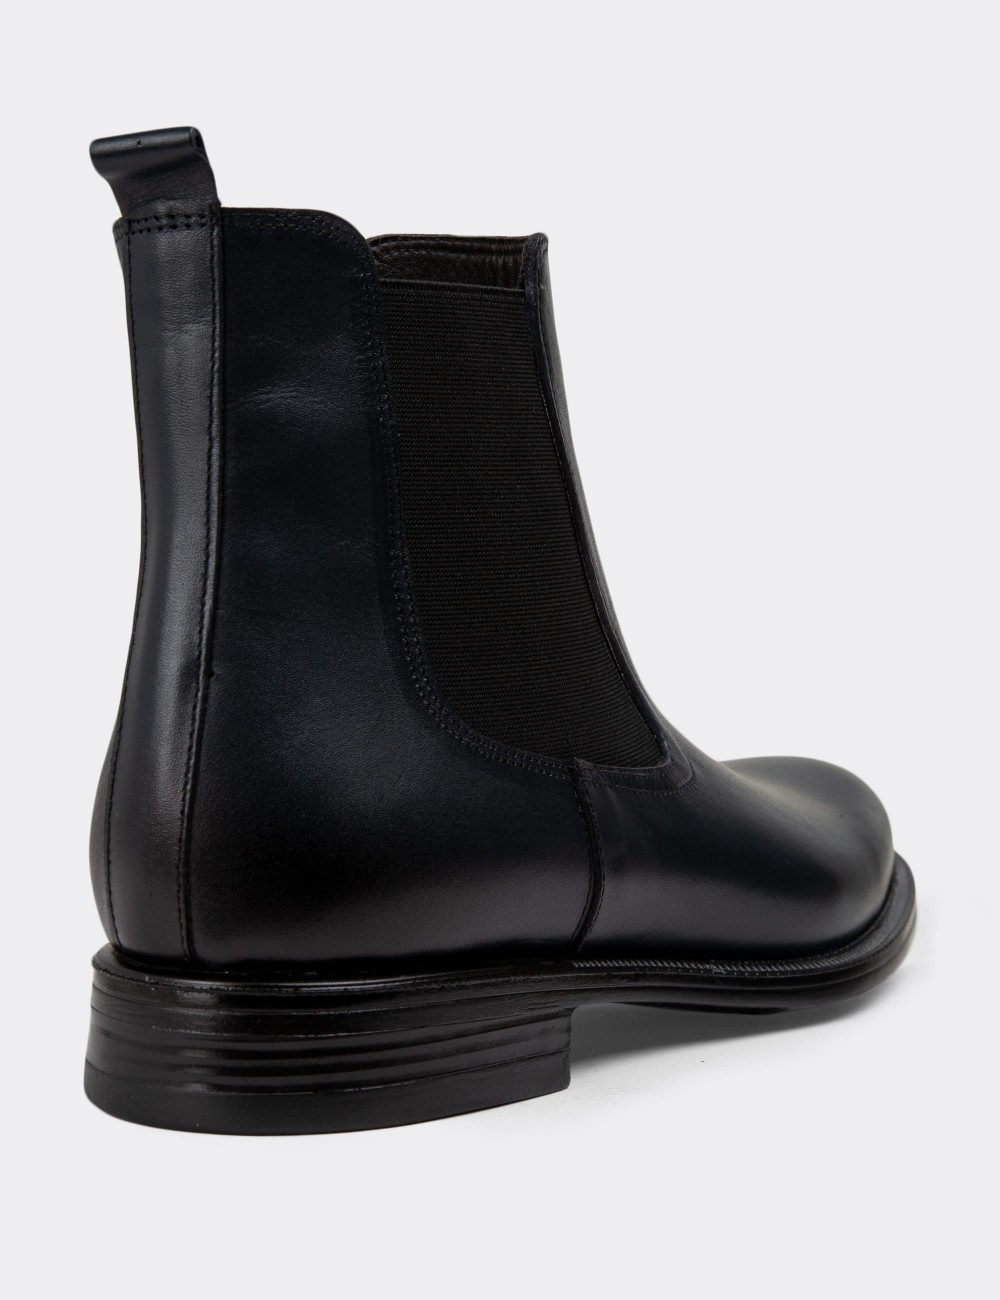 Navy Leather Chelsea Boots - 01919MLCVC01